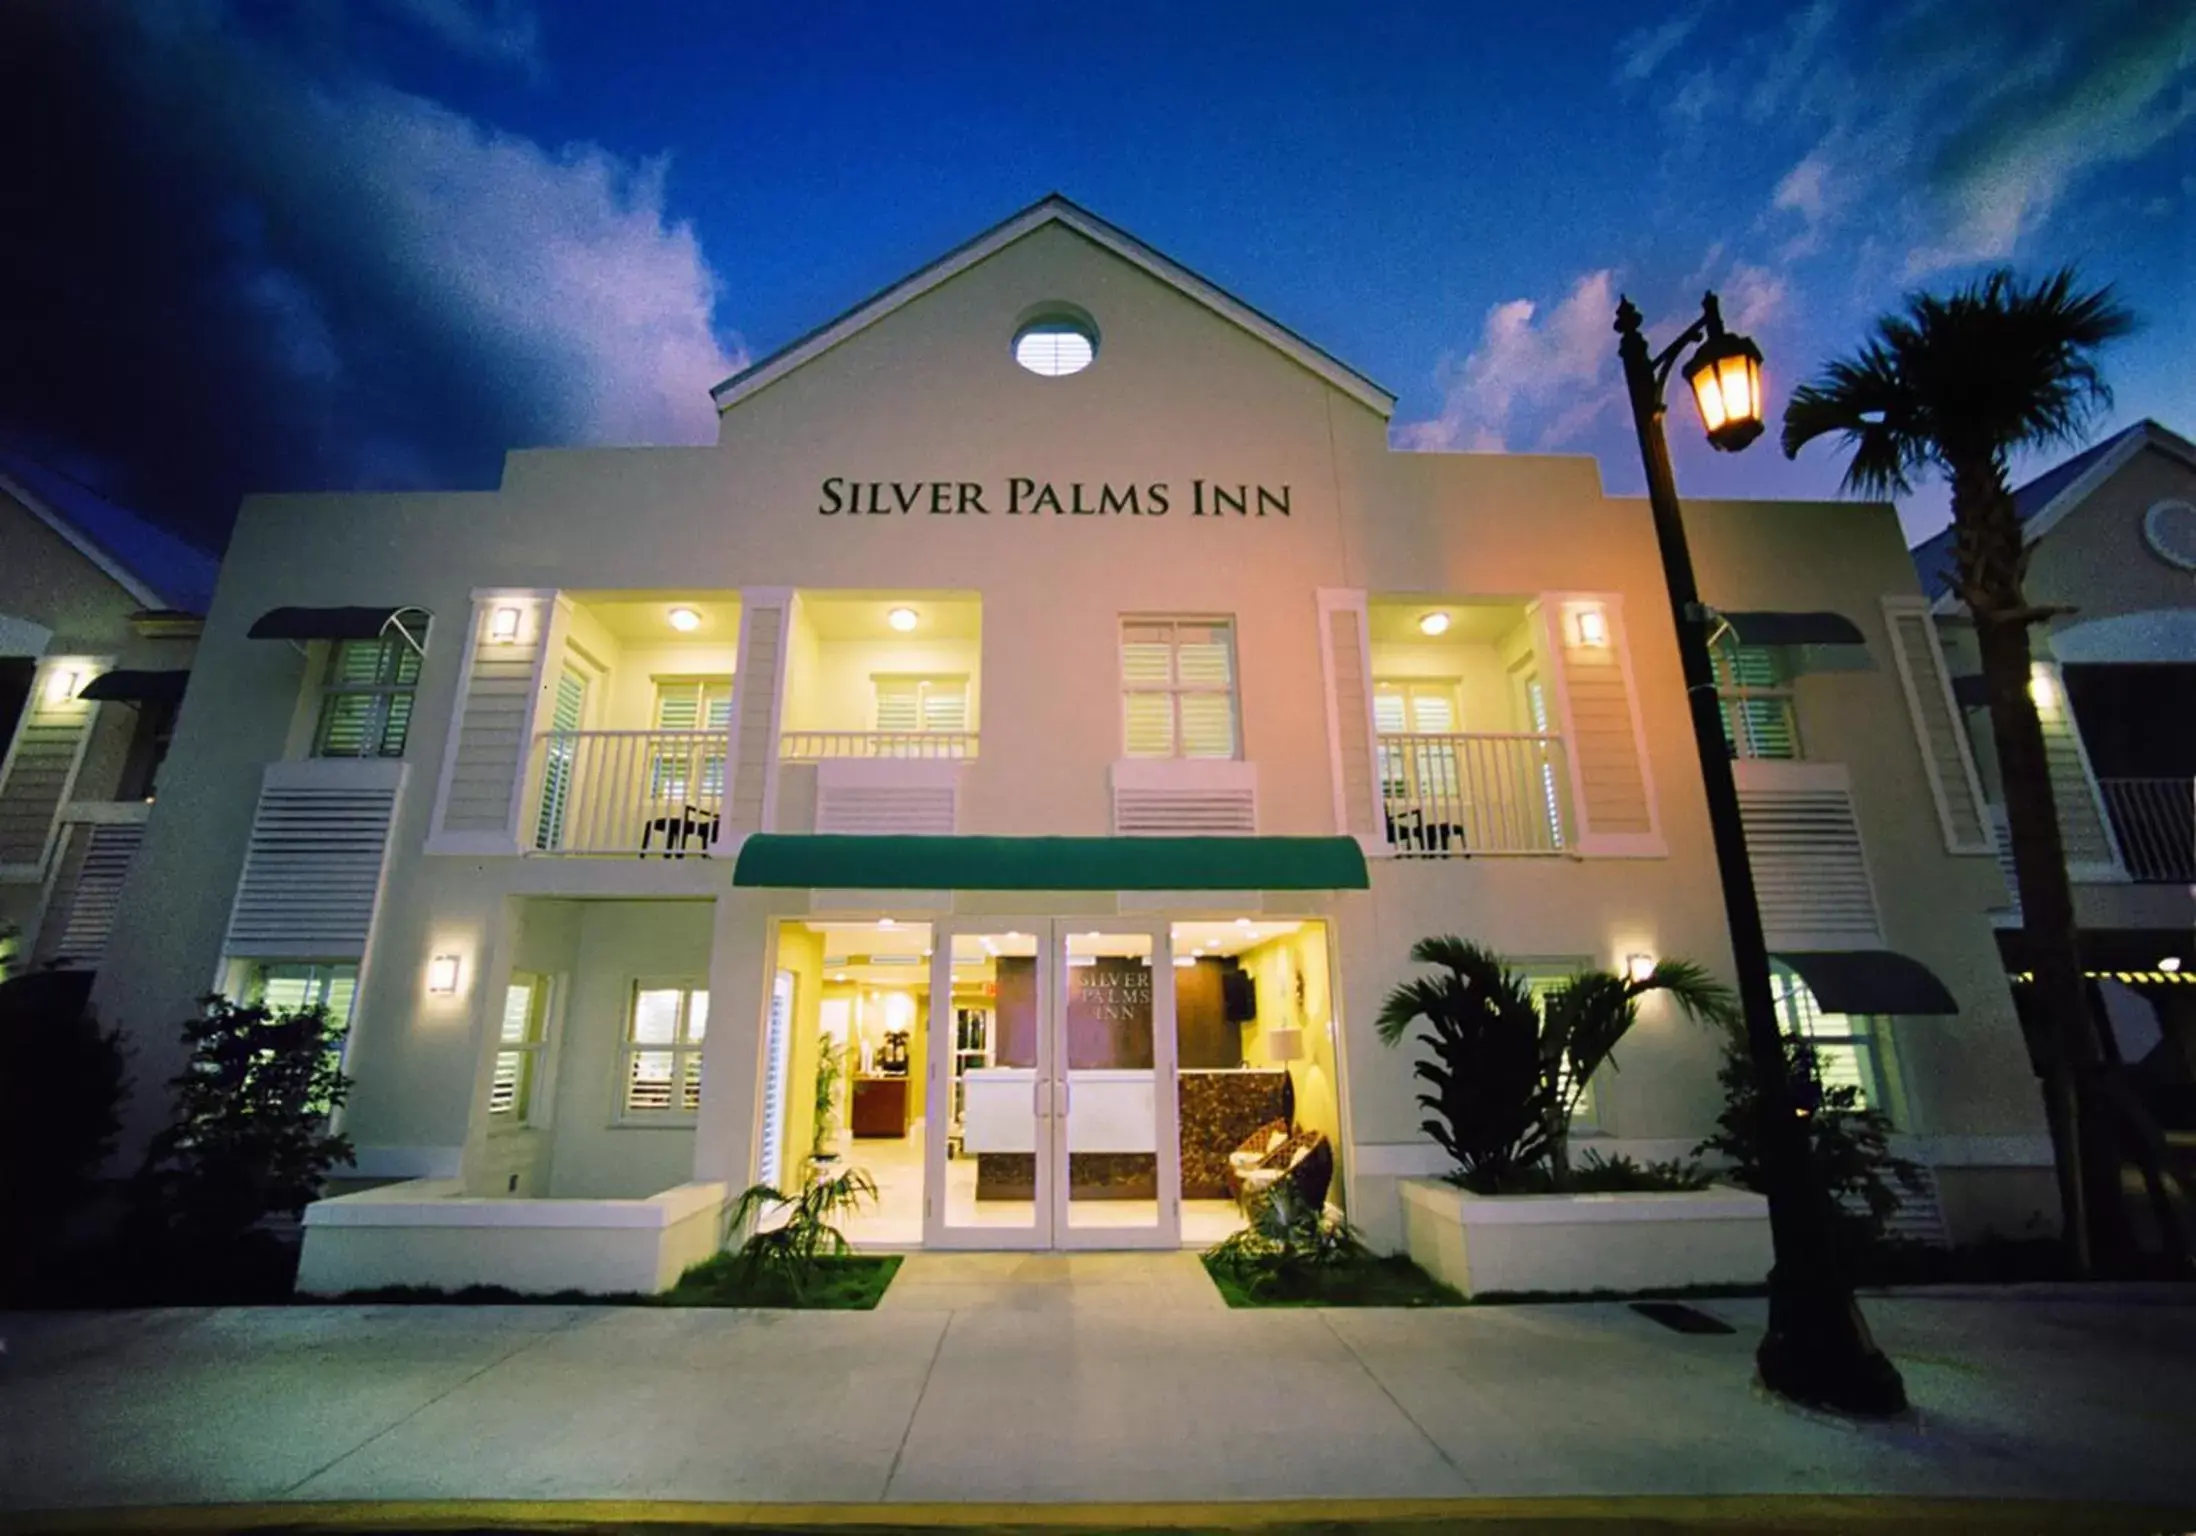 Property Building in Silver Palms Inn